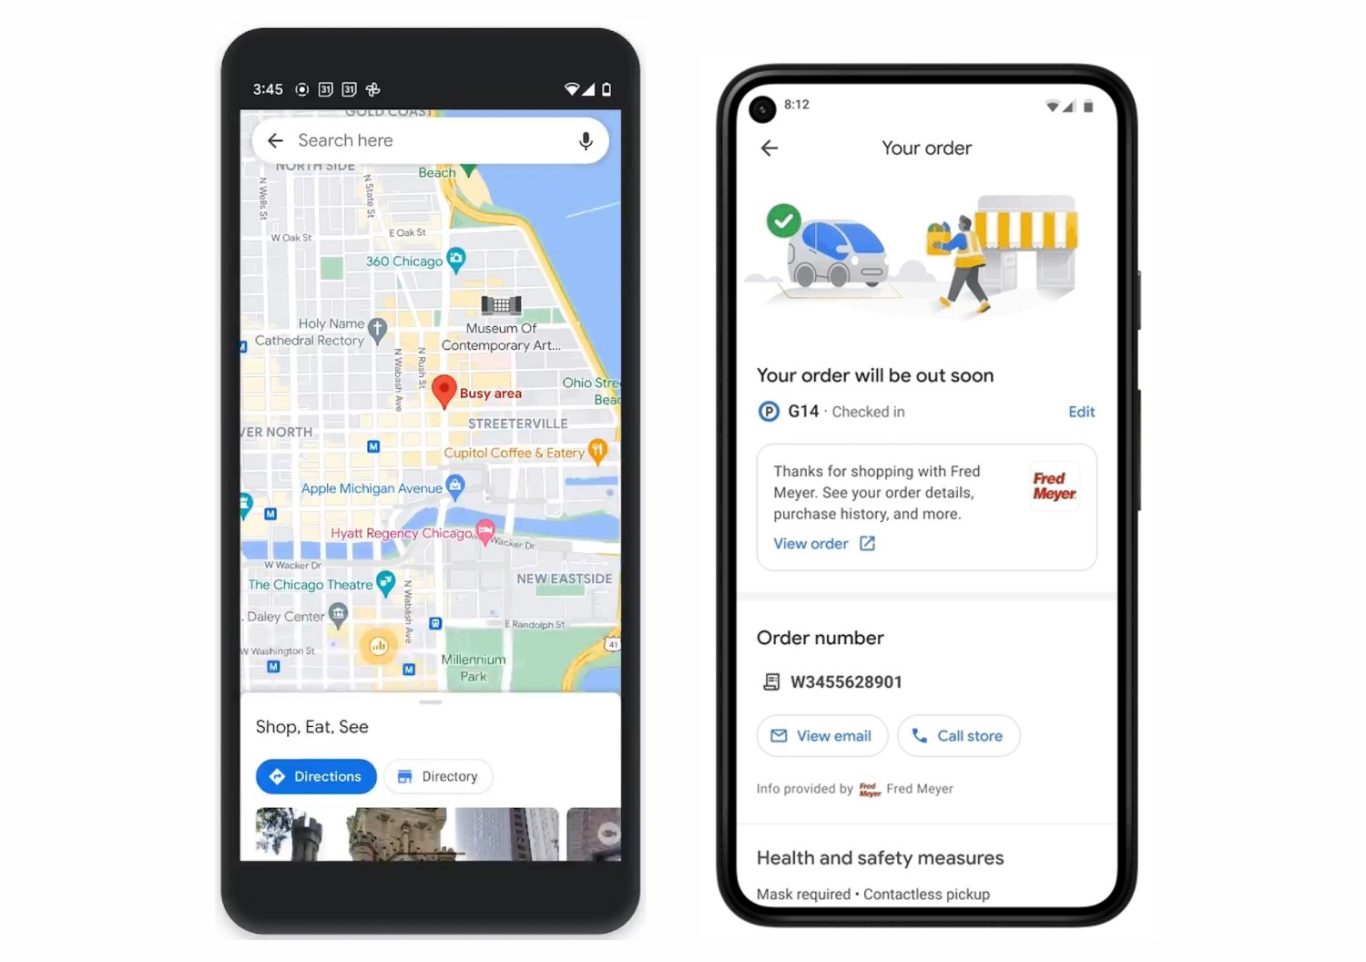 Google Maps Gets Sweet New Features in Latest Update